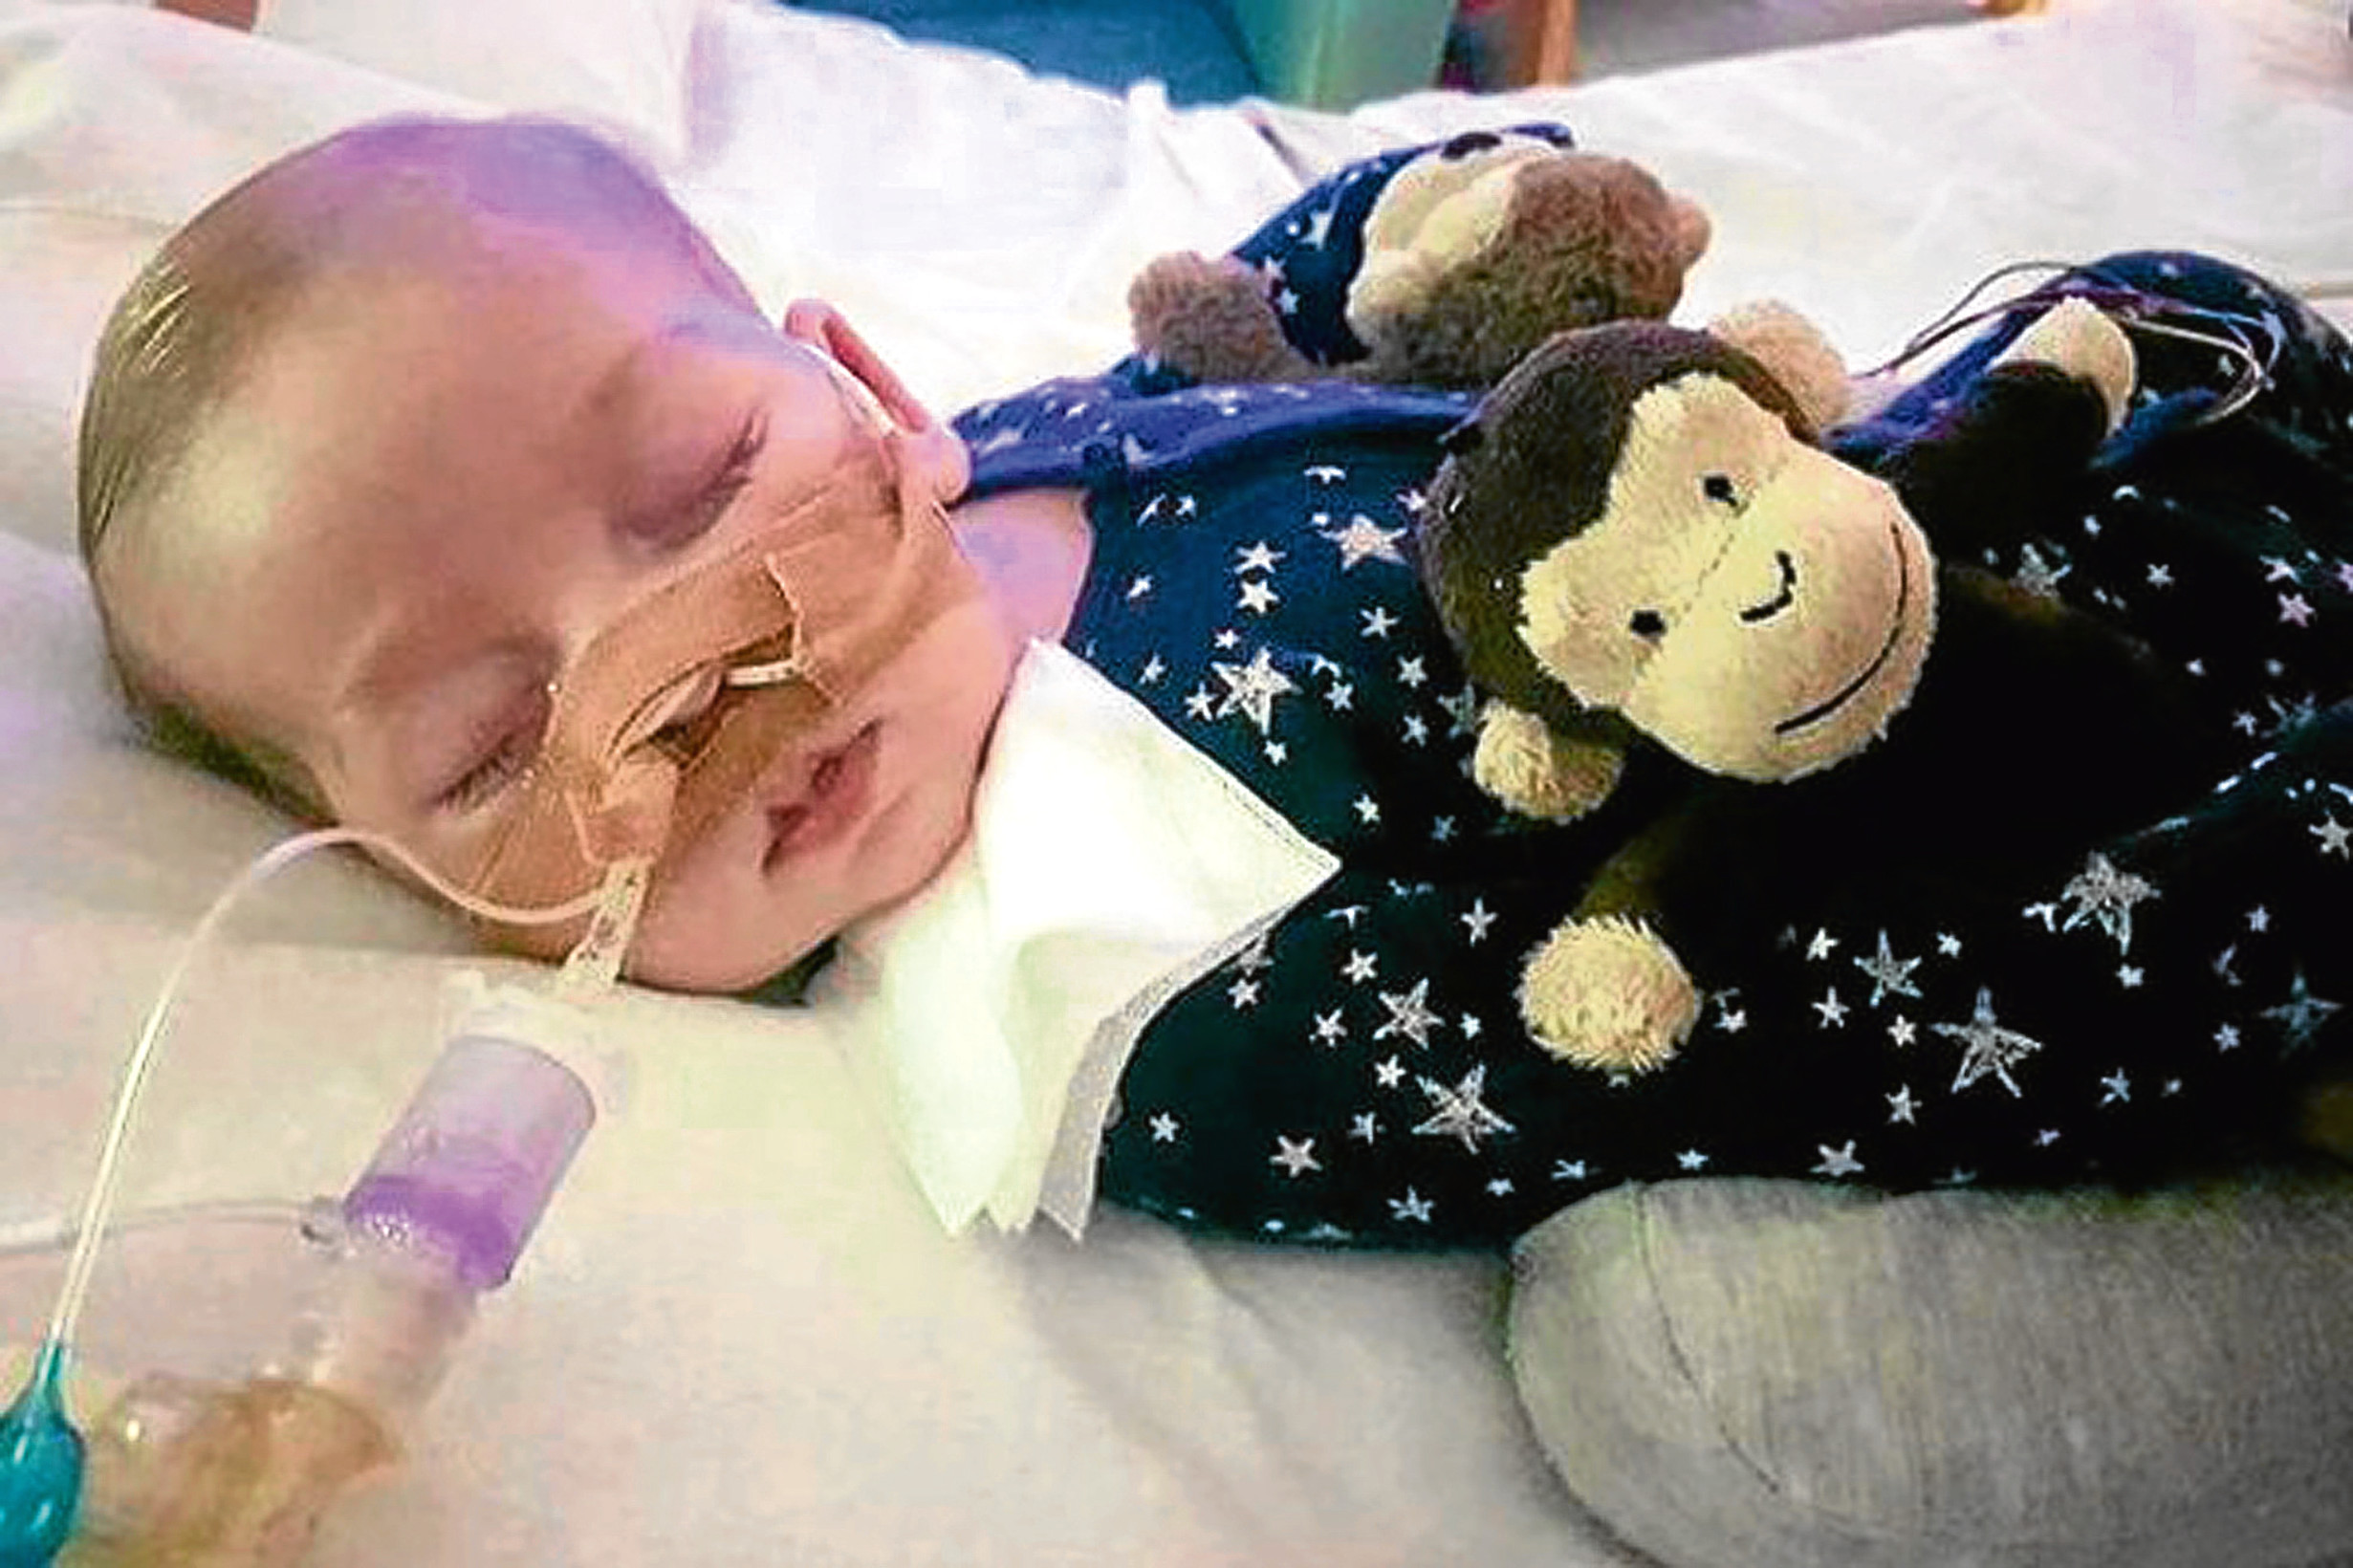 Doctors can withdraw life-support treatment from the baby with a rare genetic condition against his parents' wishes, a High Court judge has ruled. (Family handout/PA Wire)